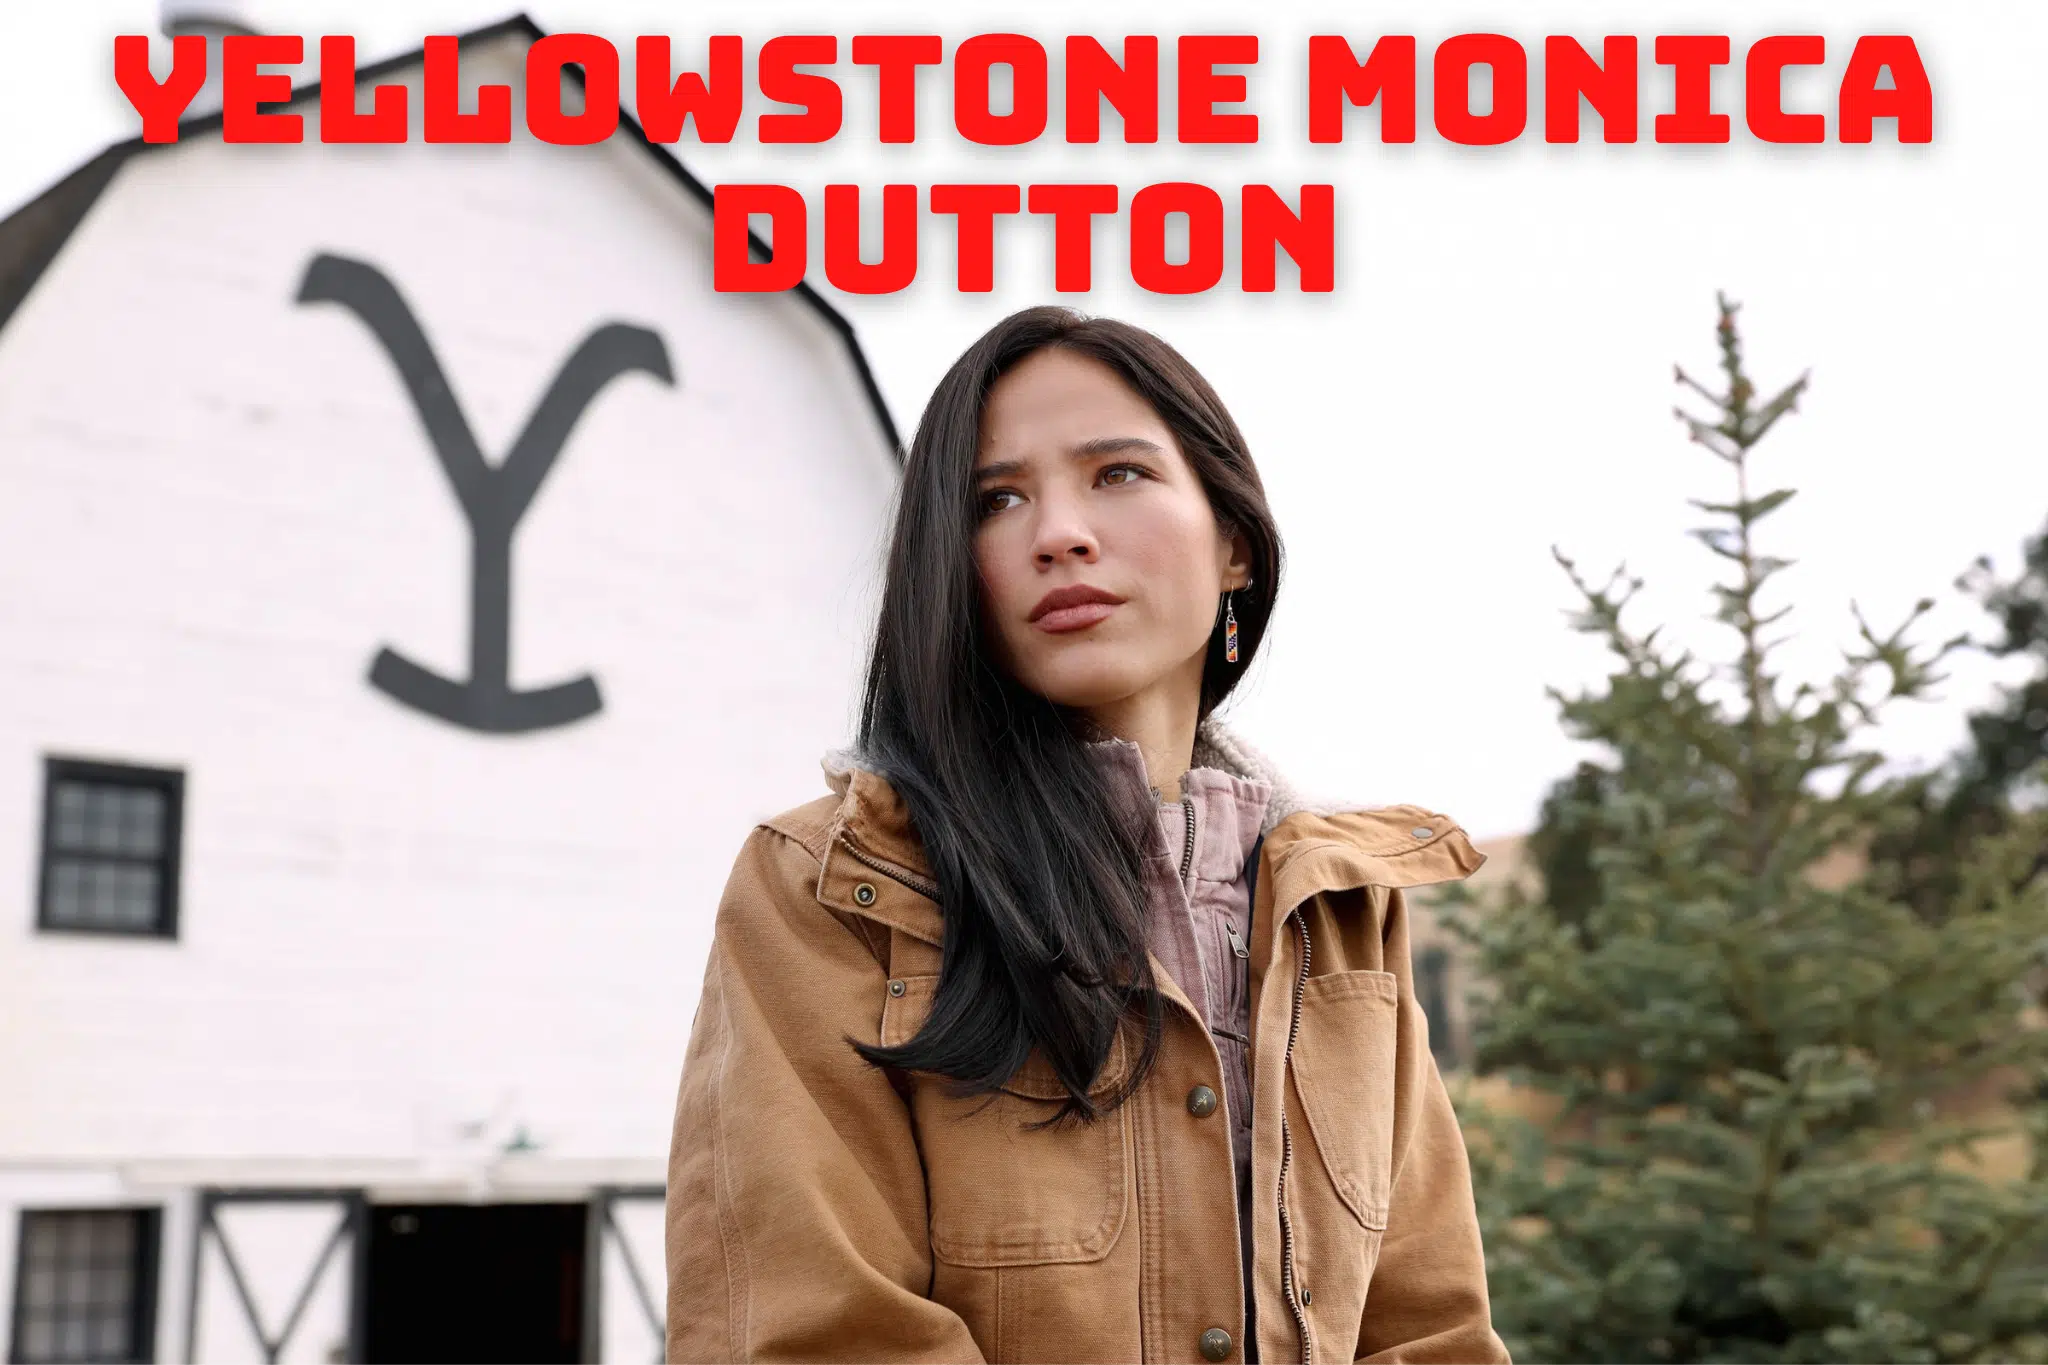 Monica is the Most Important Character in Yellowstone - Here is Why!